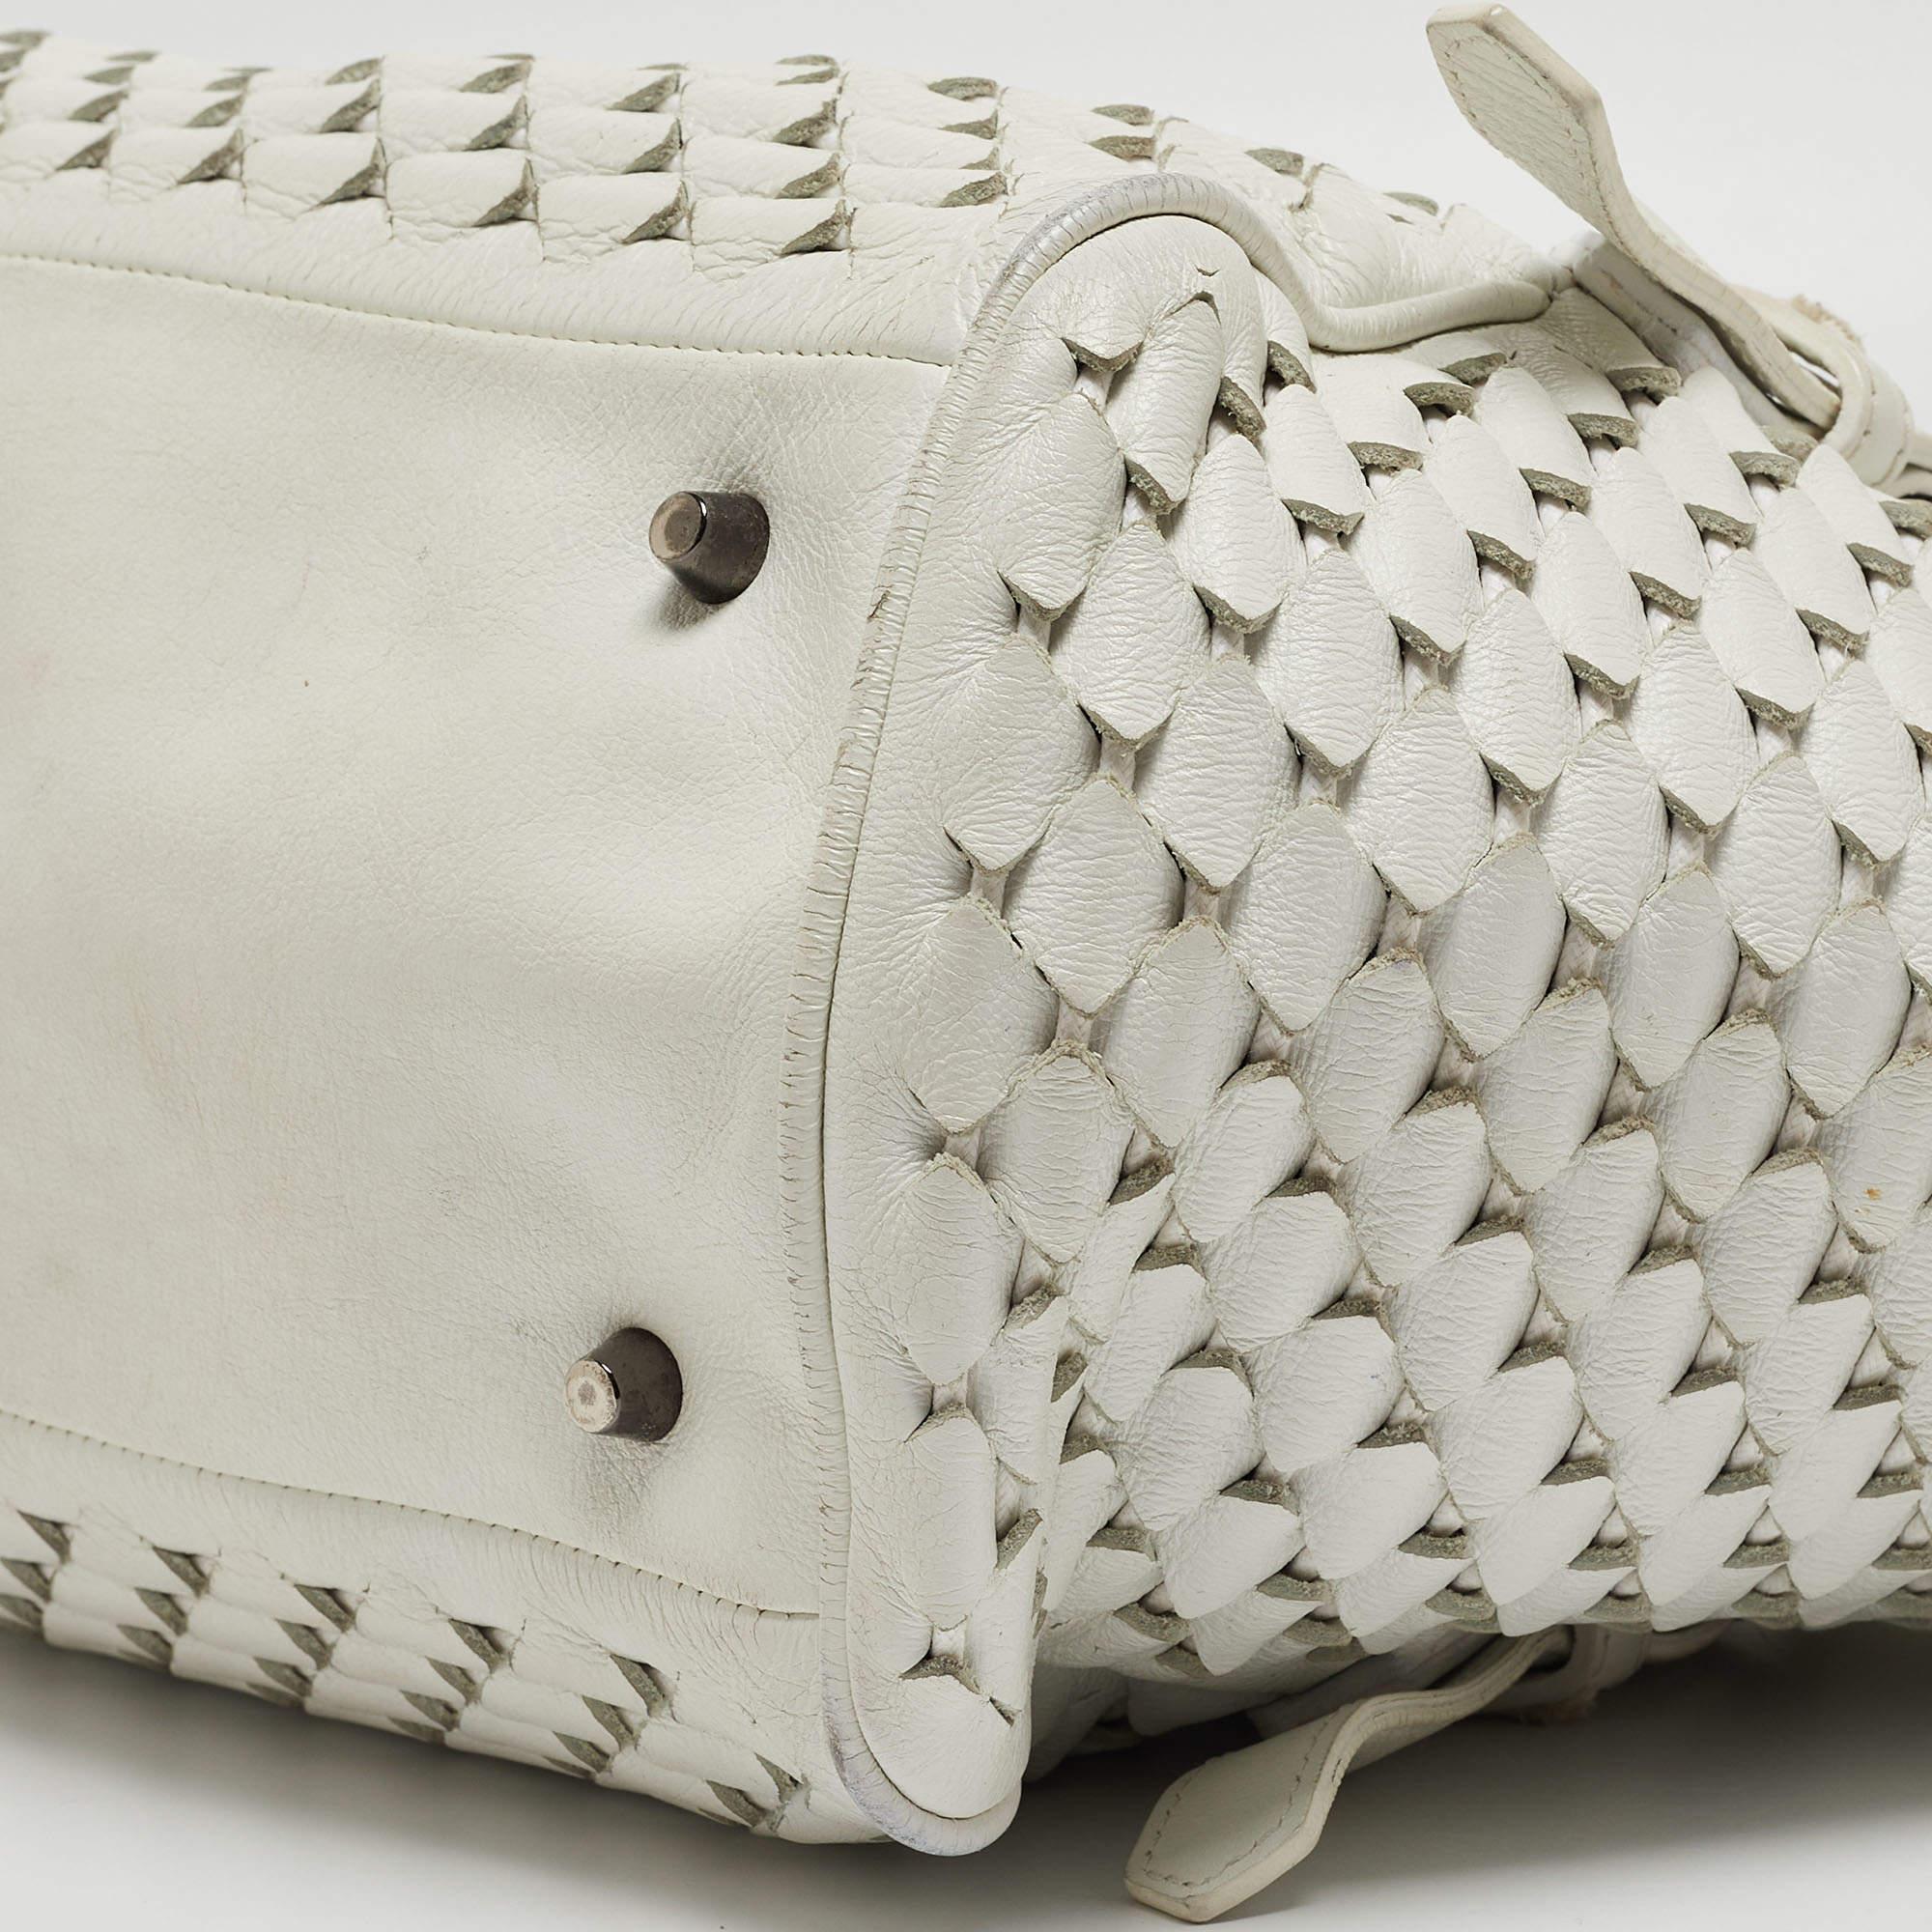 Burberry White Woven Leather Tote For Sale 9